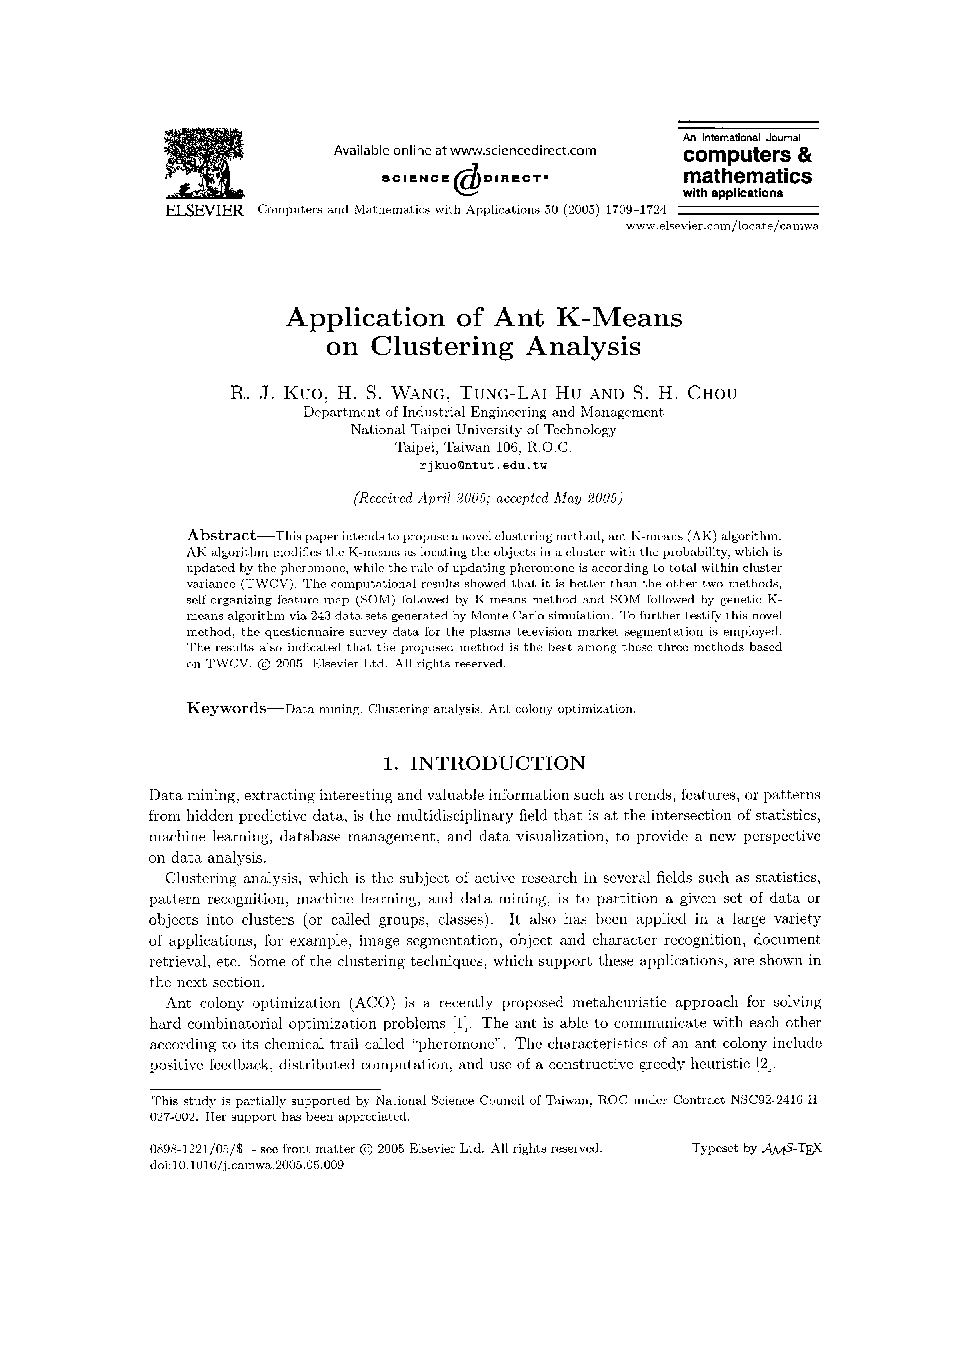 Application of ant K-means on clustering analysis